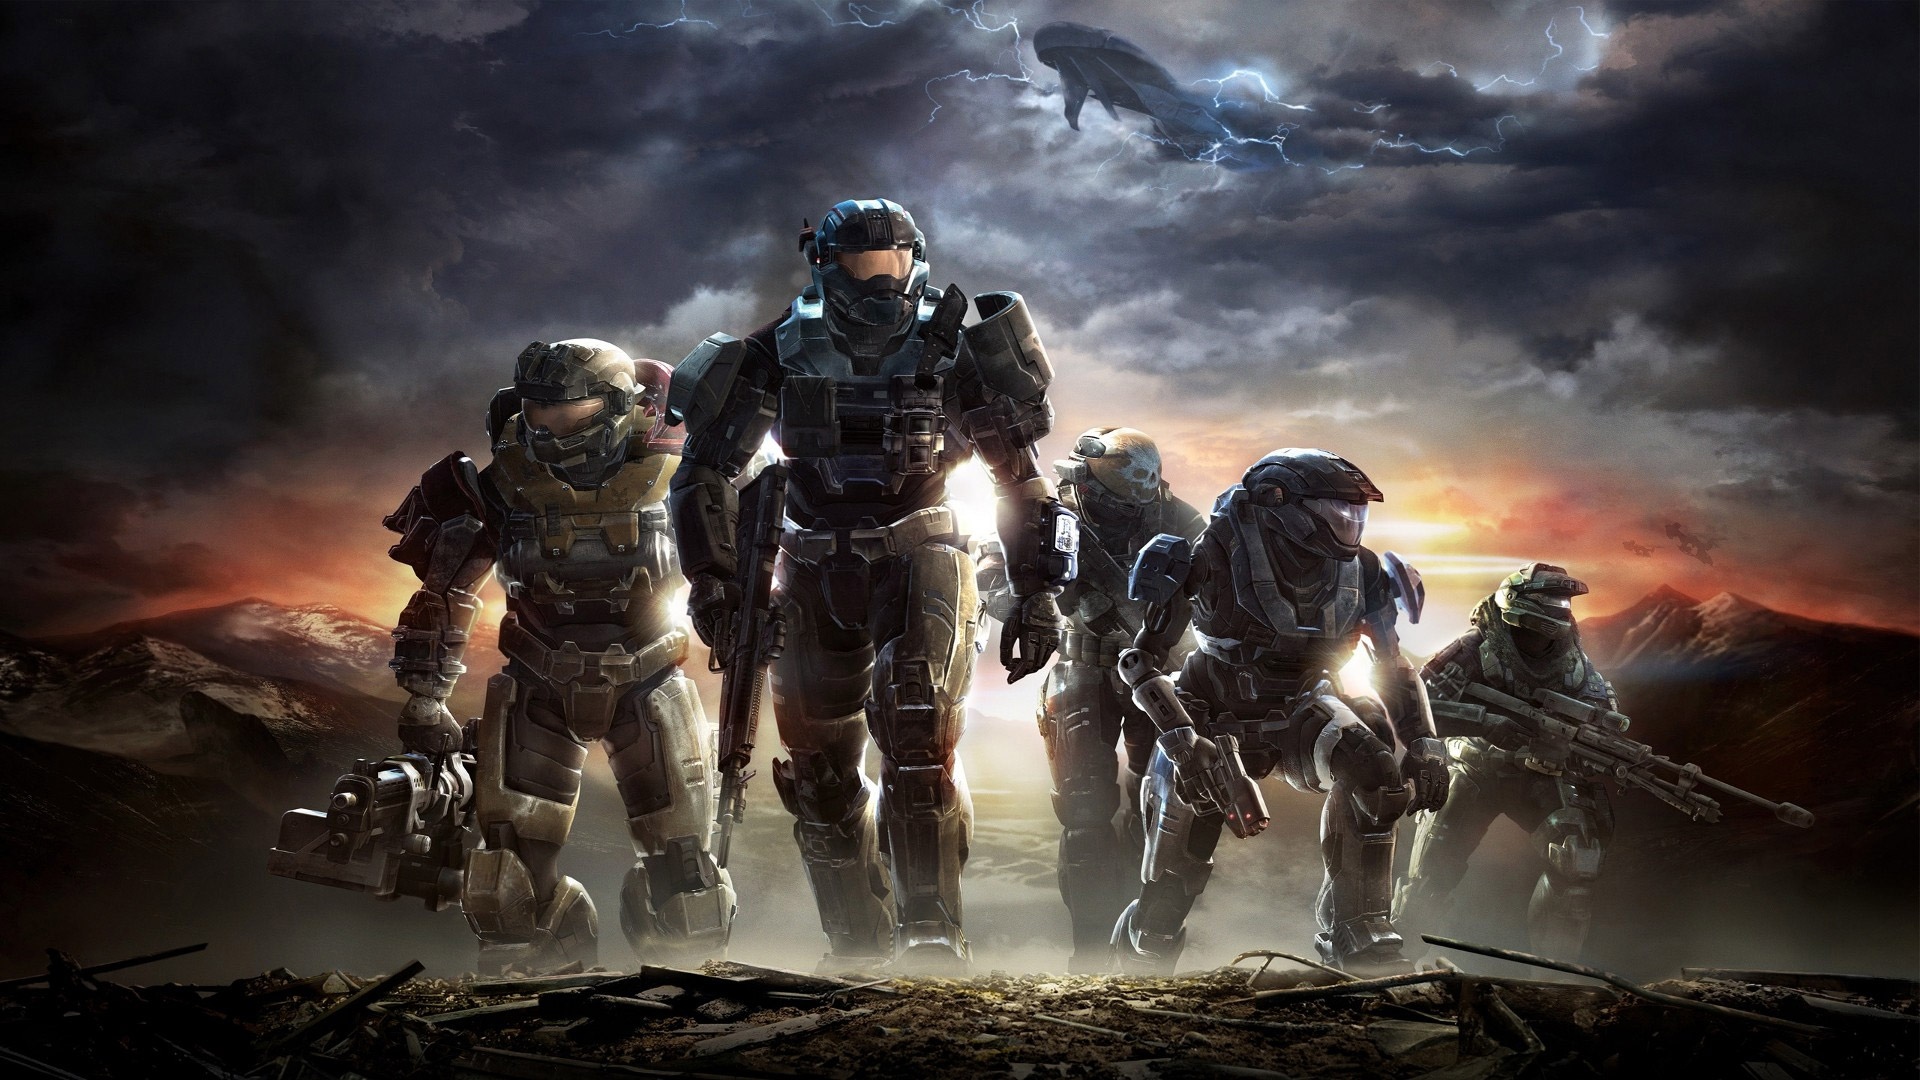 Hands-on with the Halo: Reach multiplayer beta